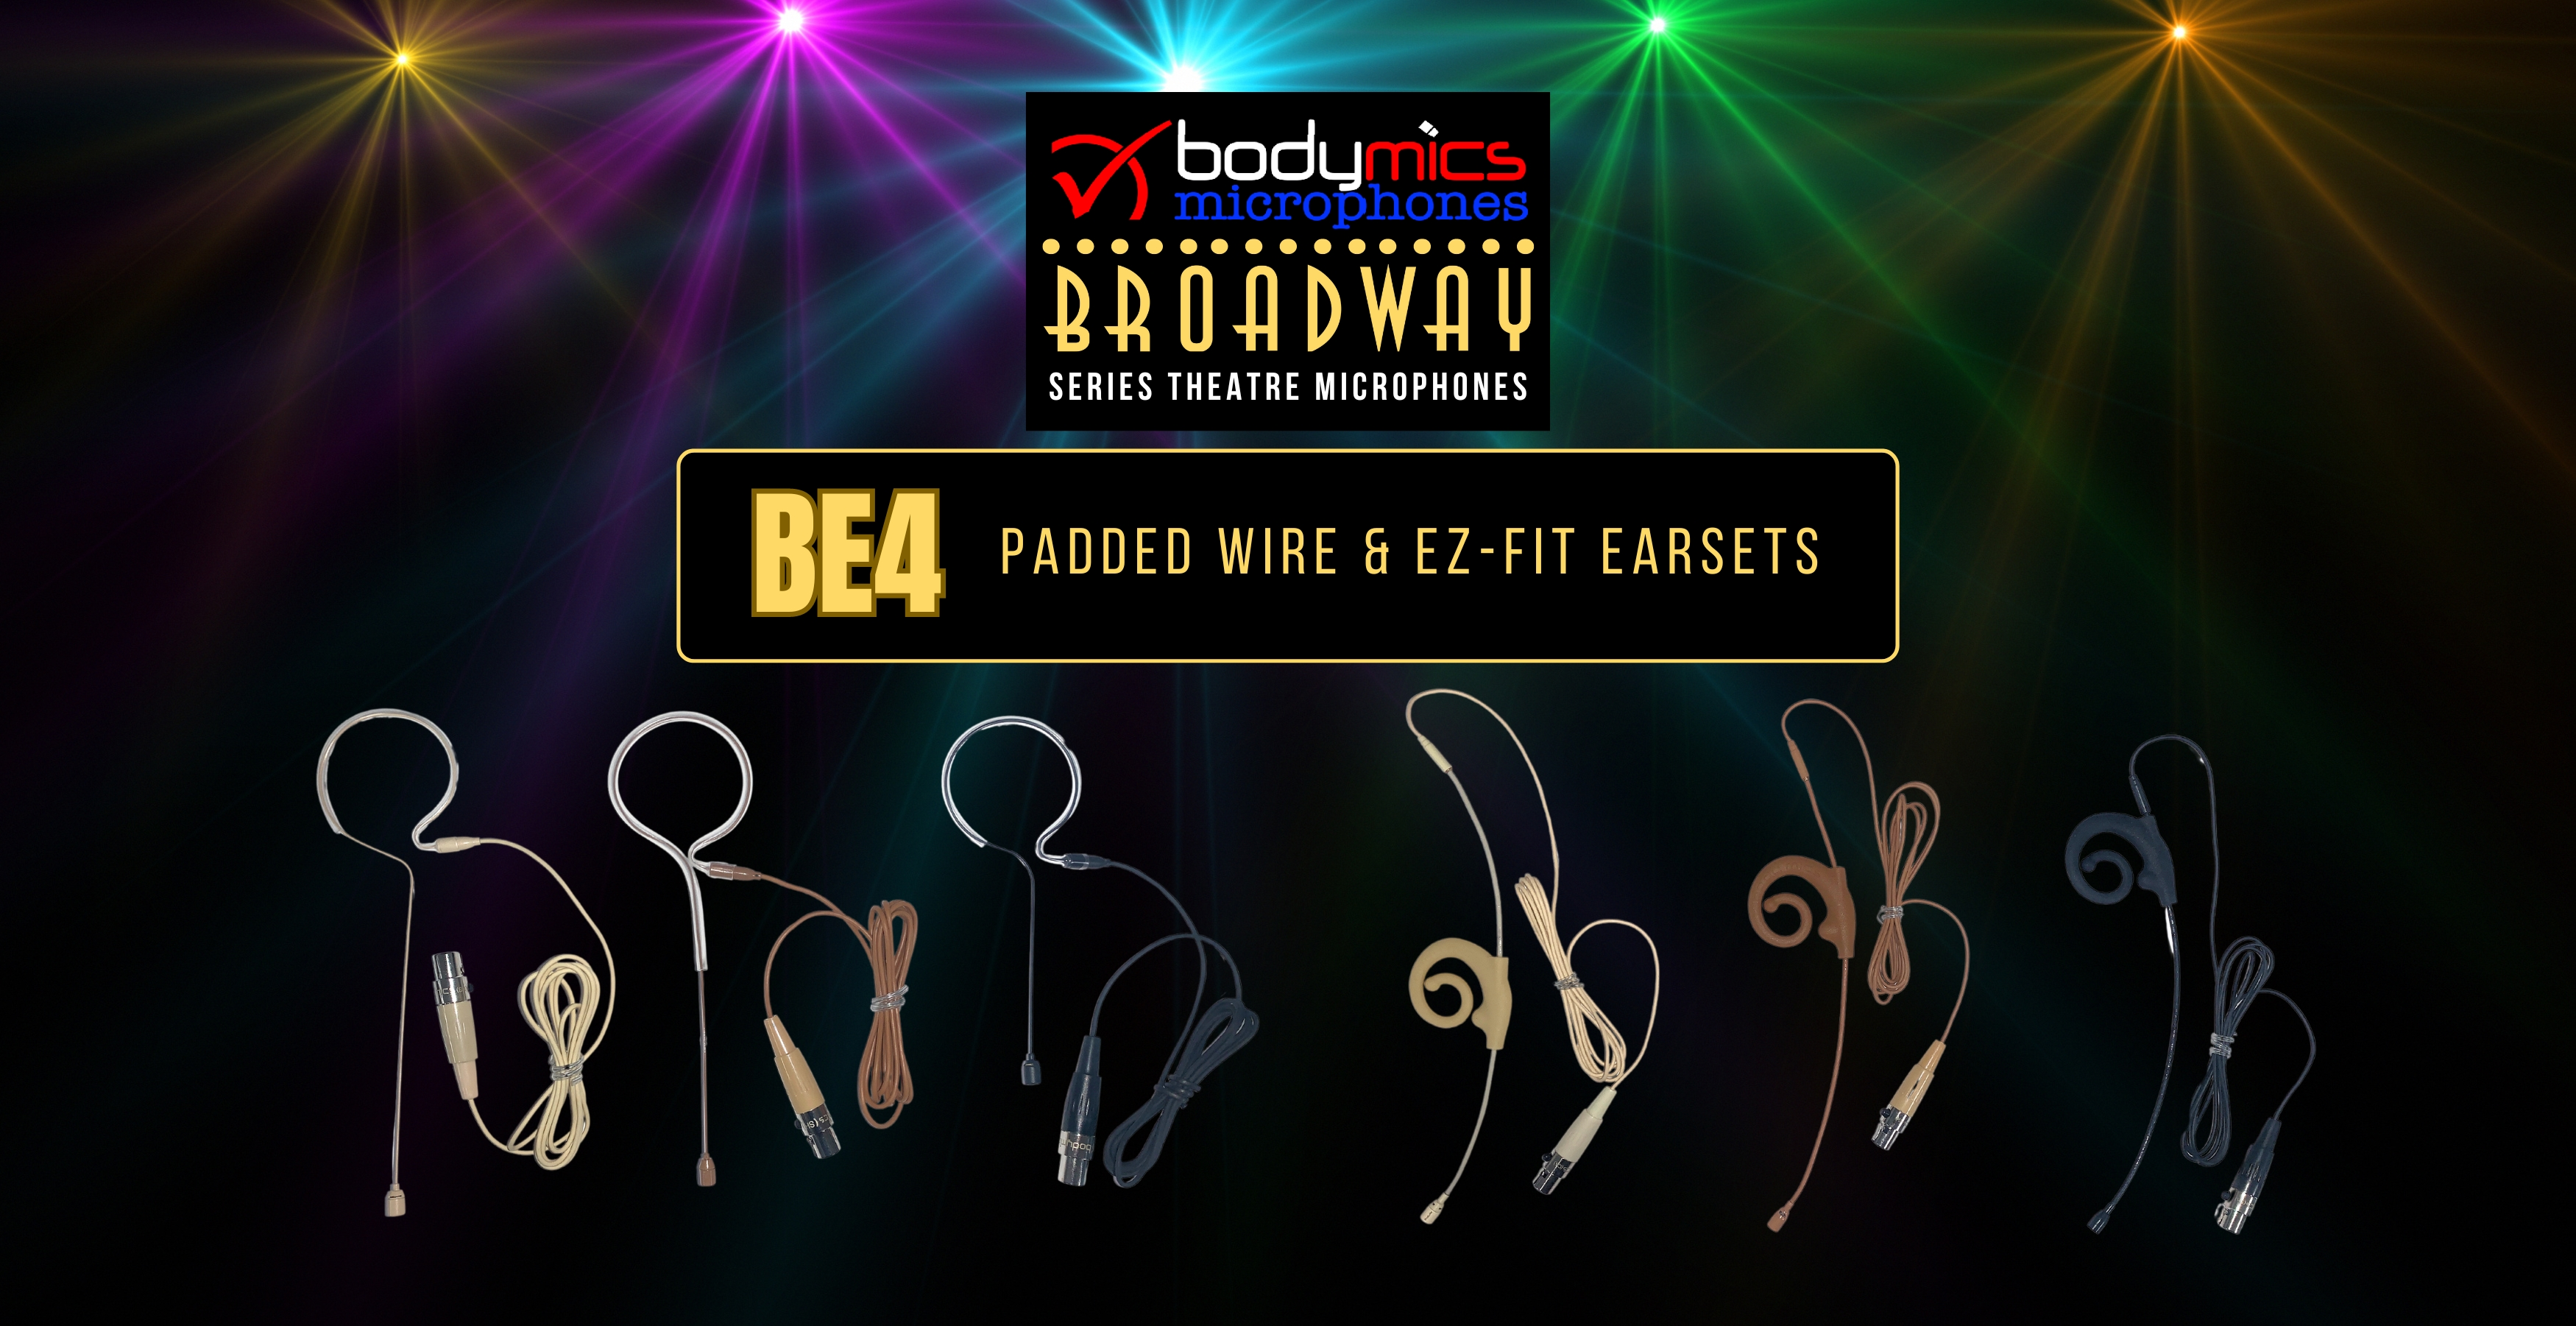 A2 Broadway Earsets